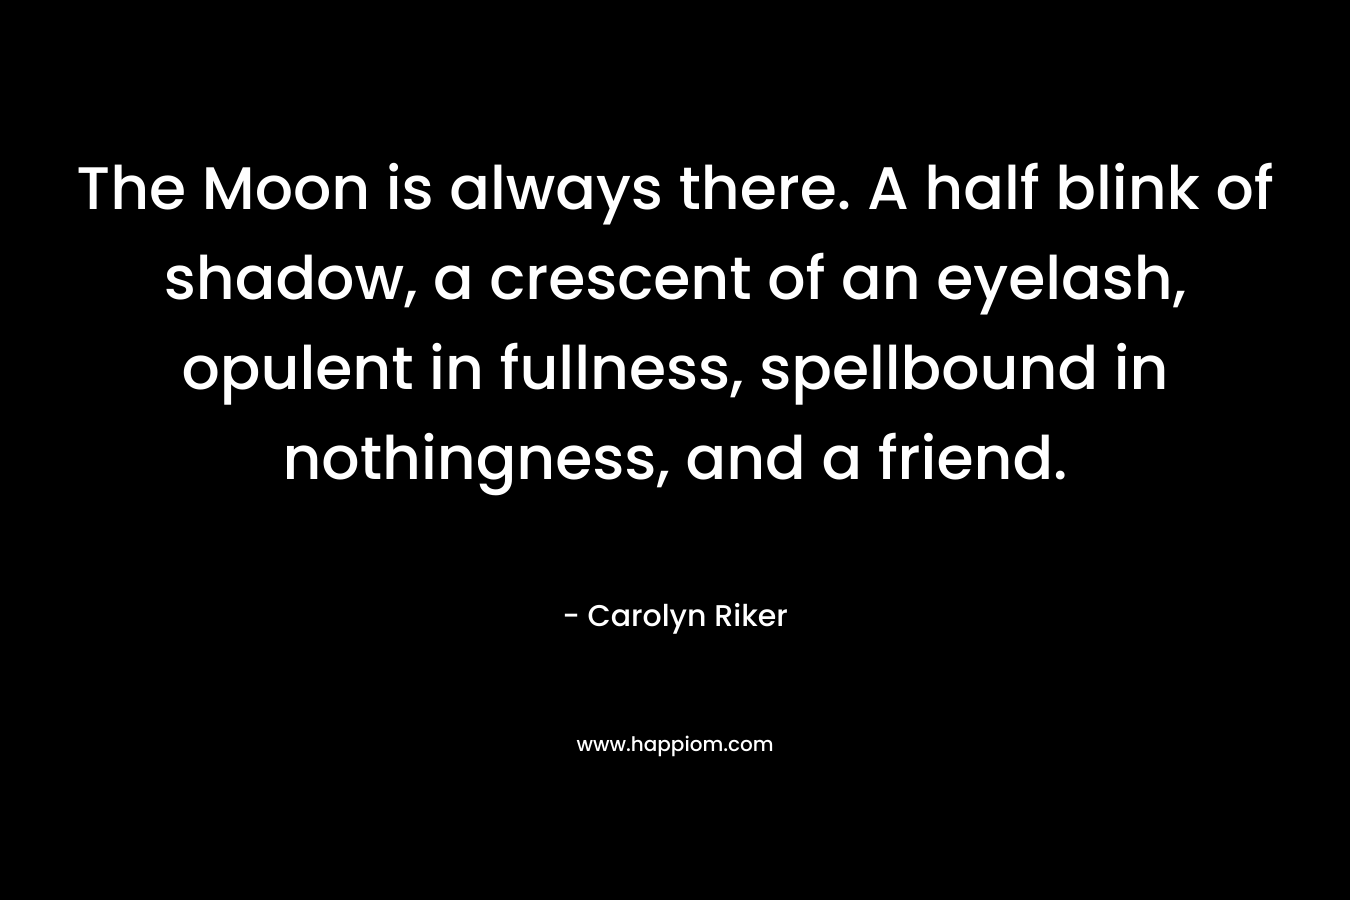 The Moon is always there. A half blink of shadow, a crescent of an eyelash, opulent in fullness, spellbound in nothingness, and a friend.